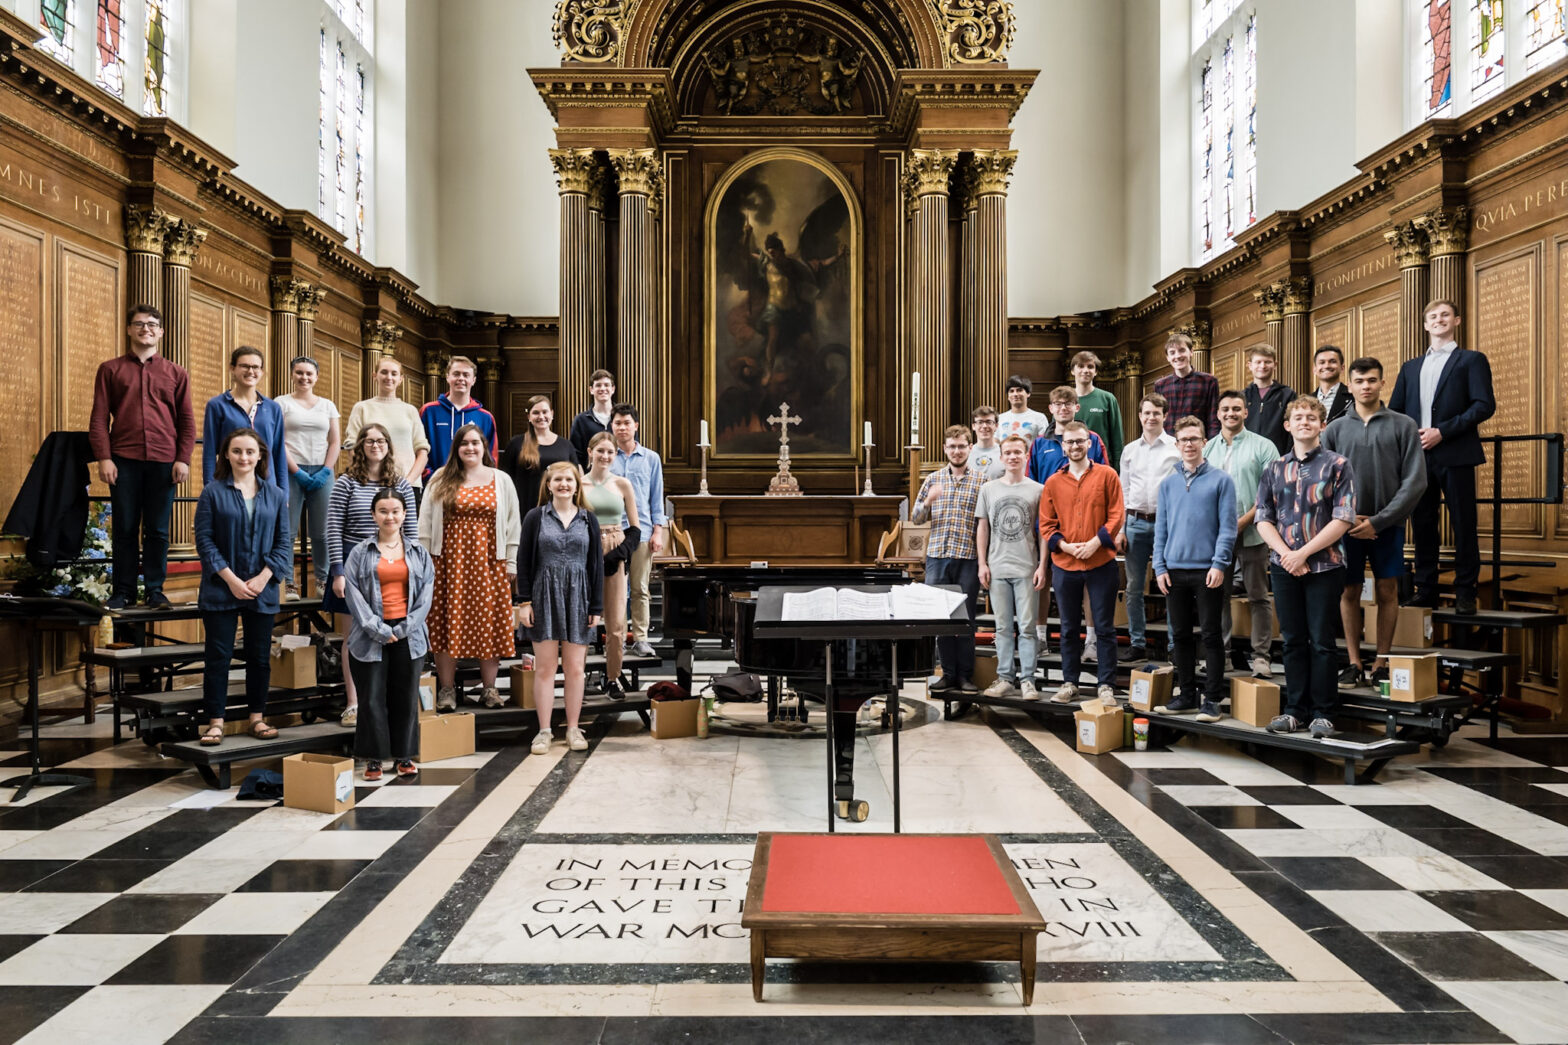 About The Choir of Trinity College Cambridge